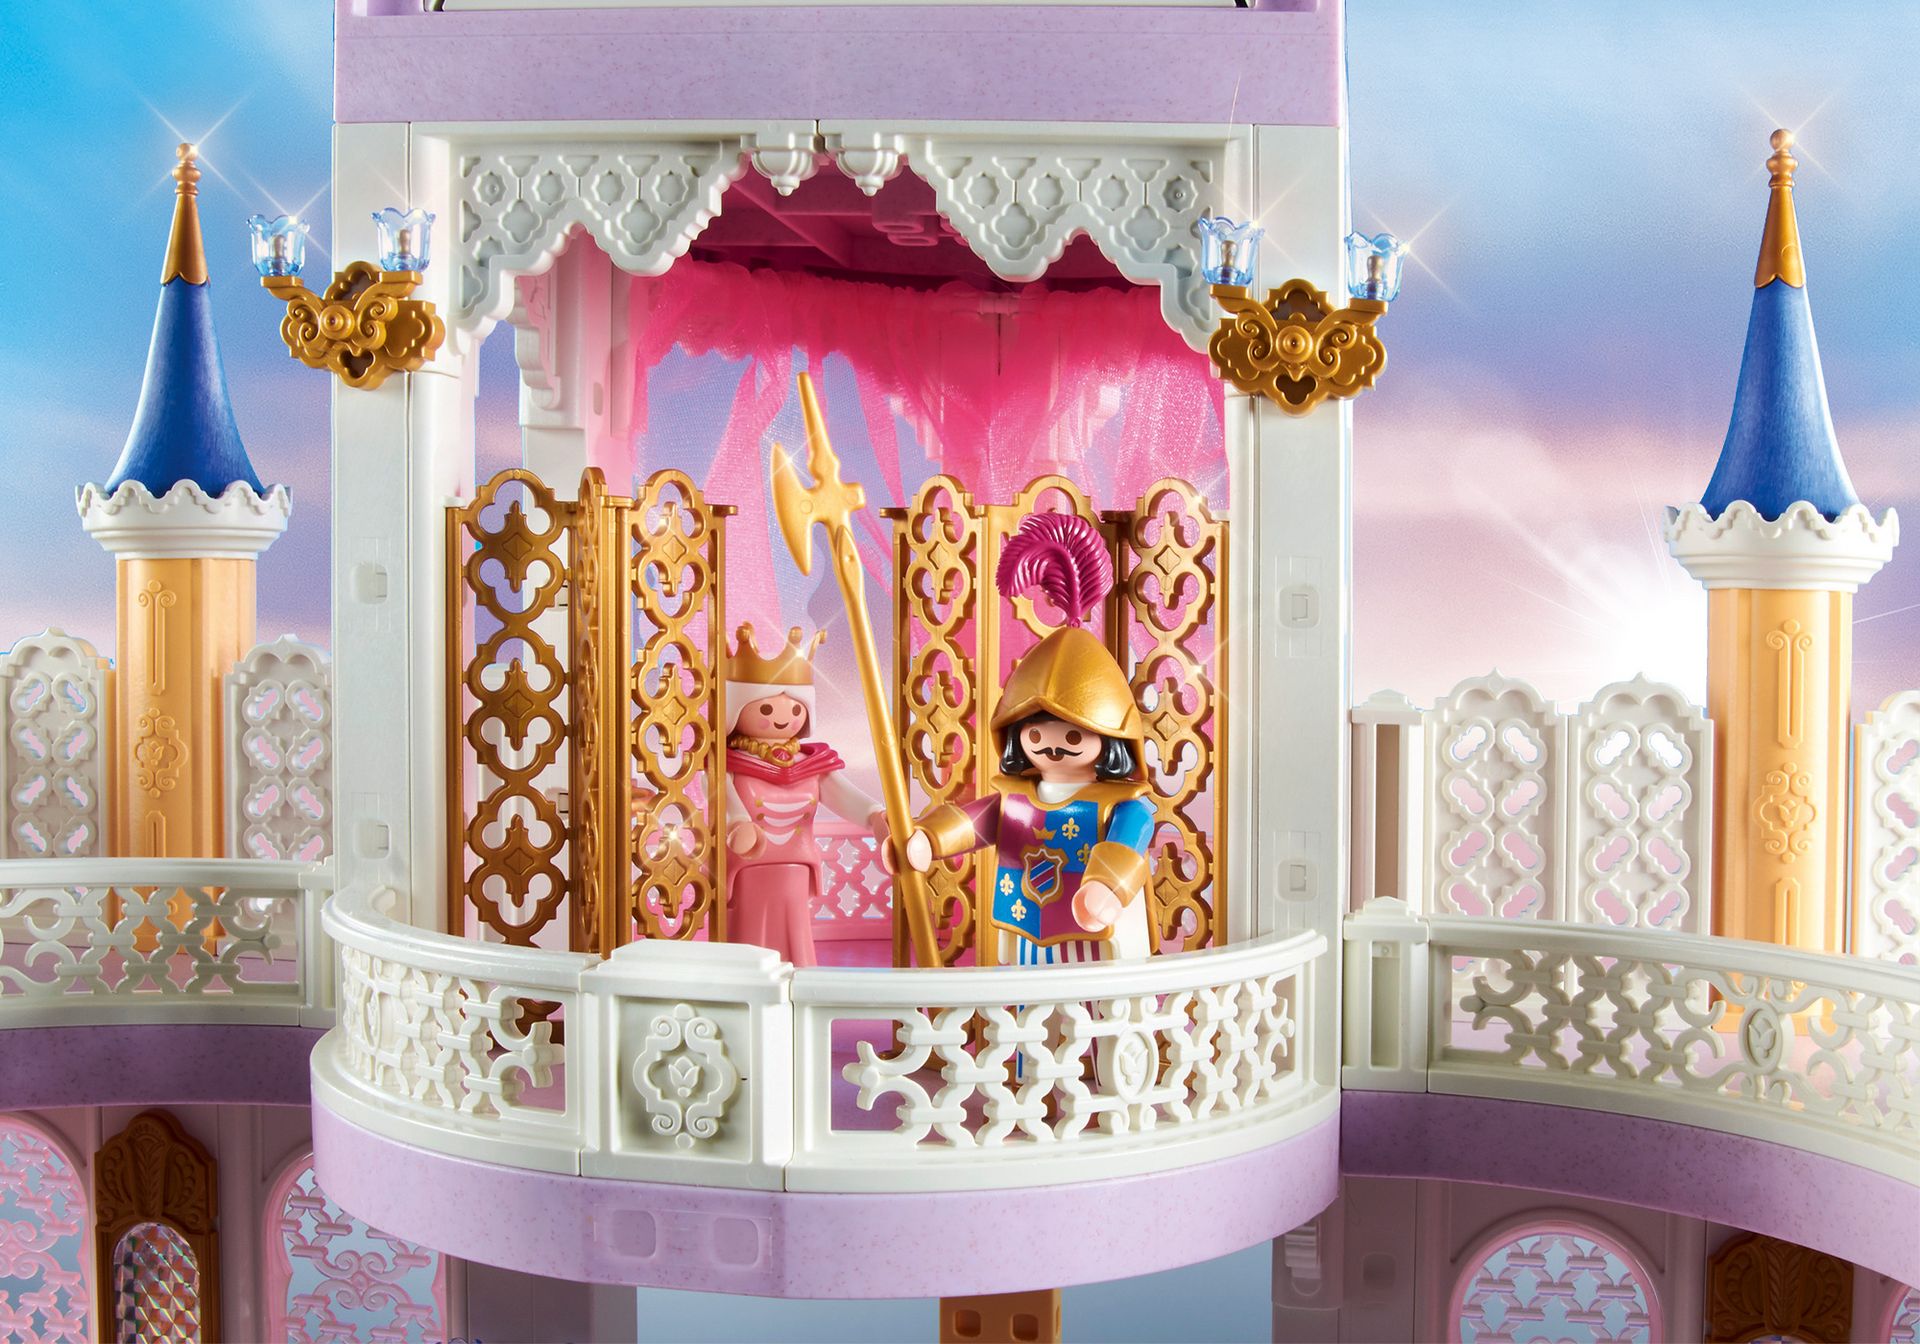 show original title Details about   Playmobil Dream Castle with lots of accessories-very good condition! 